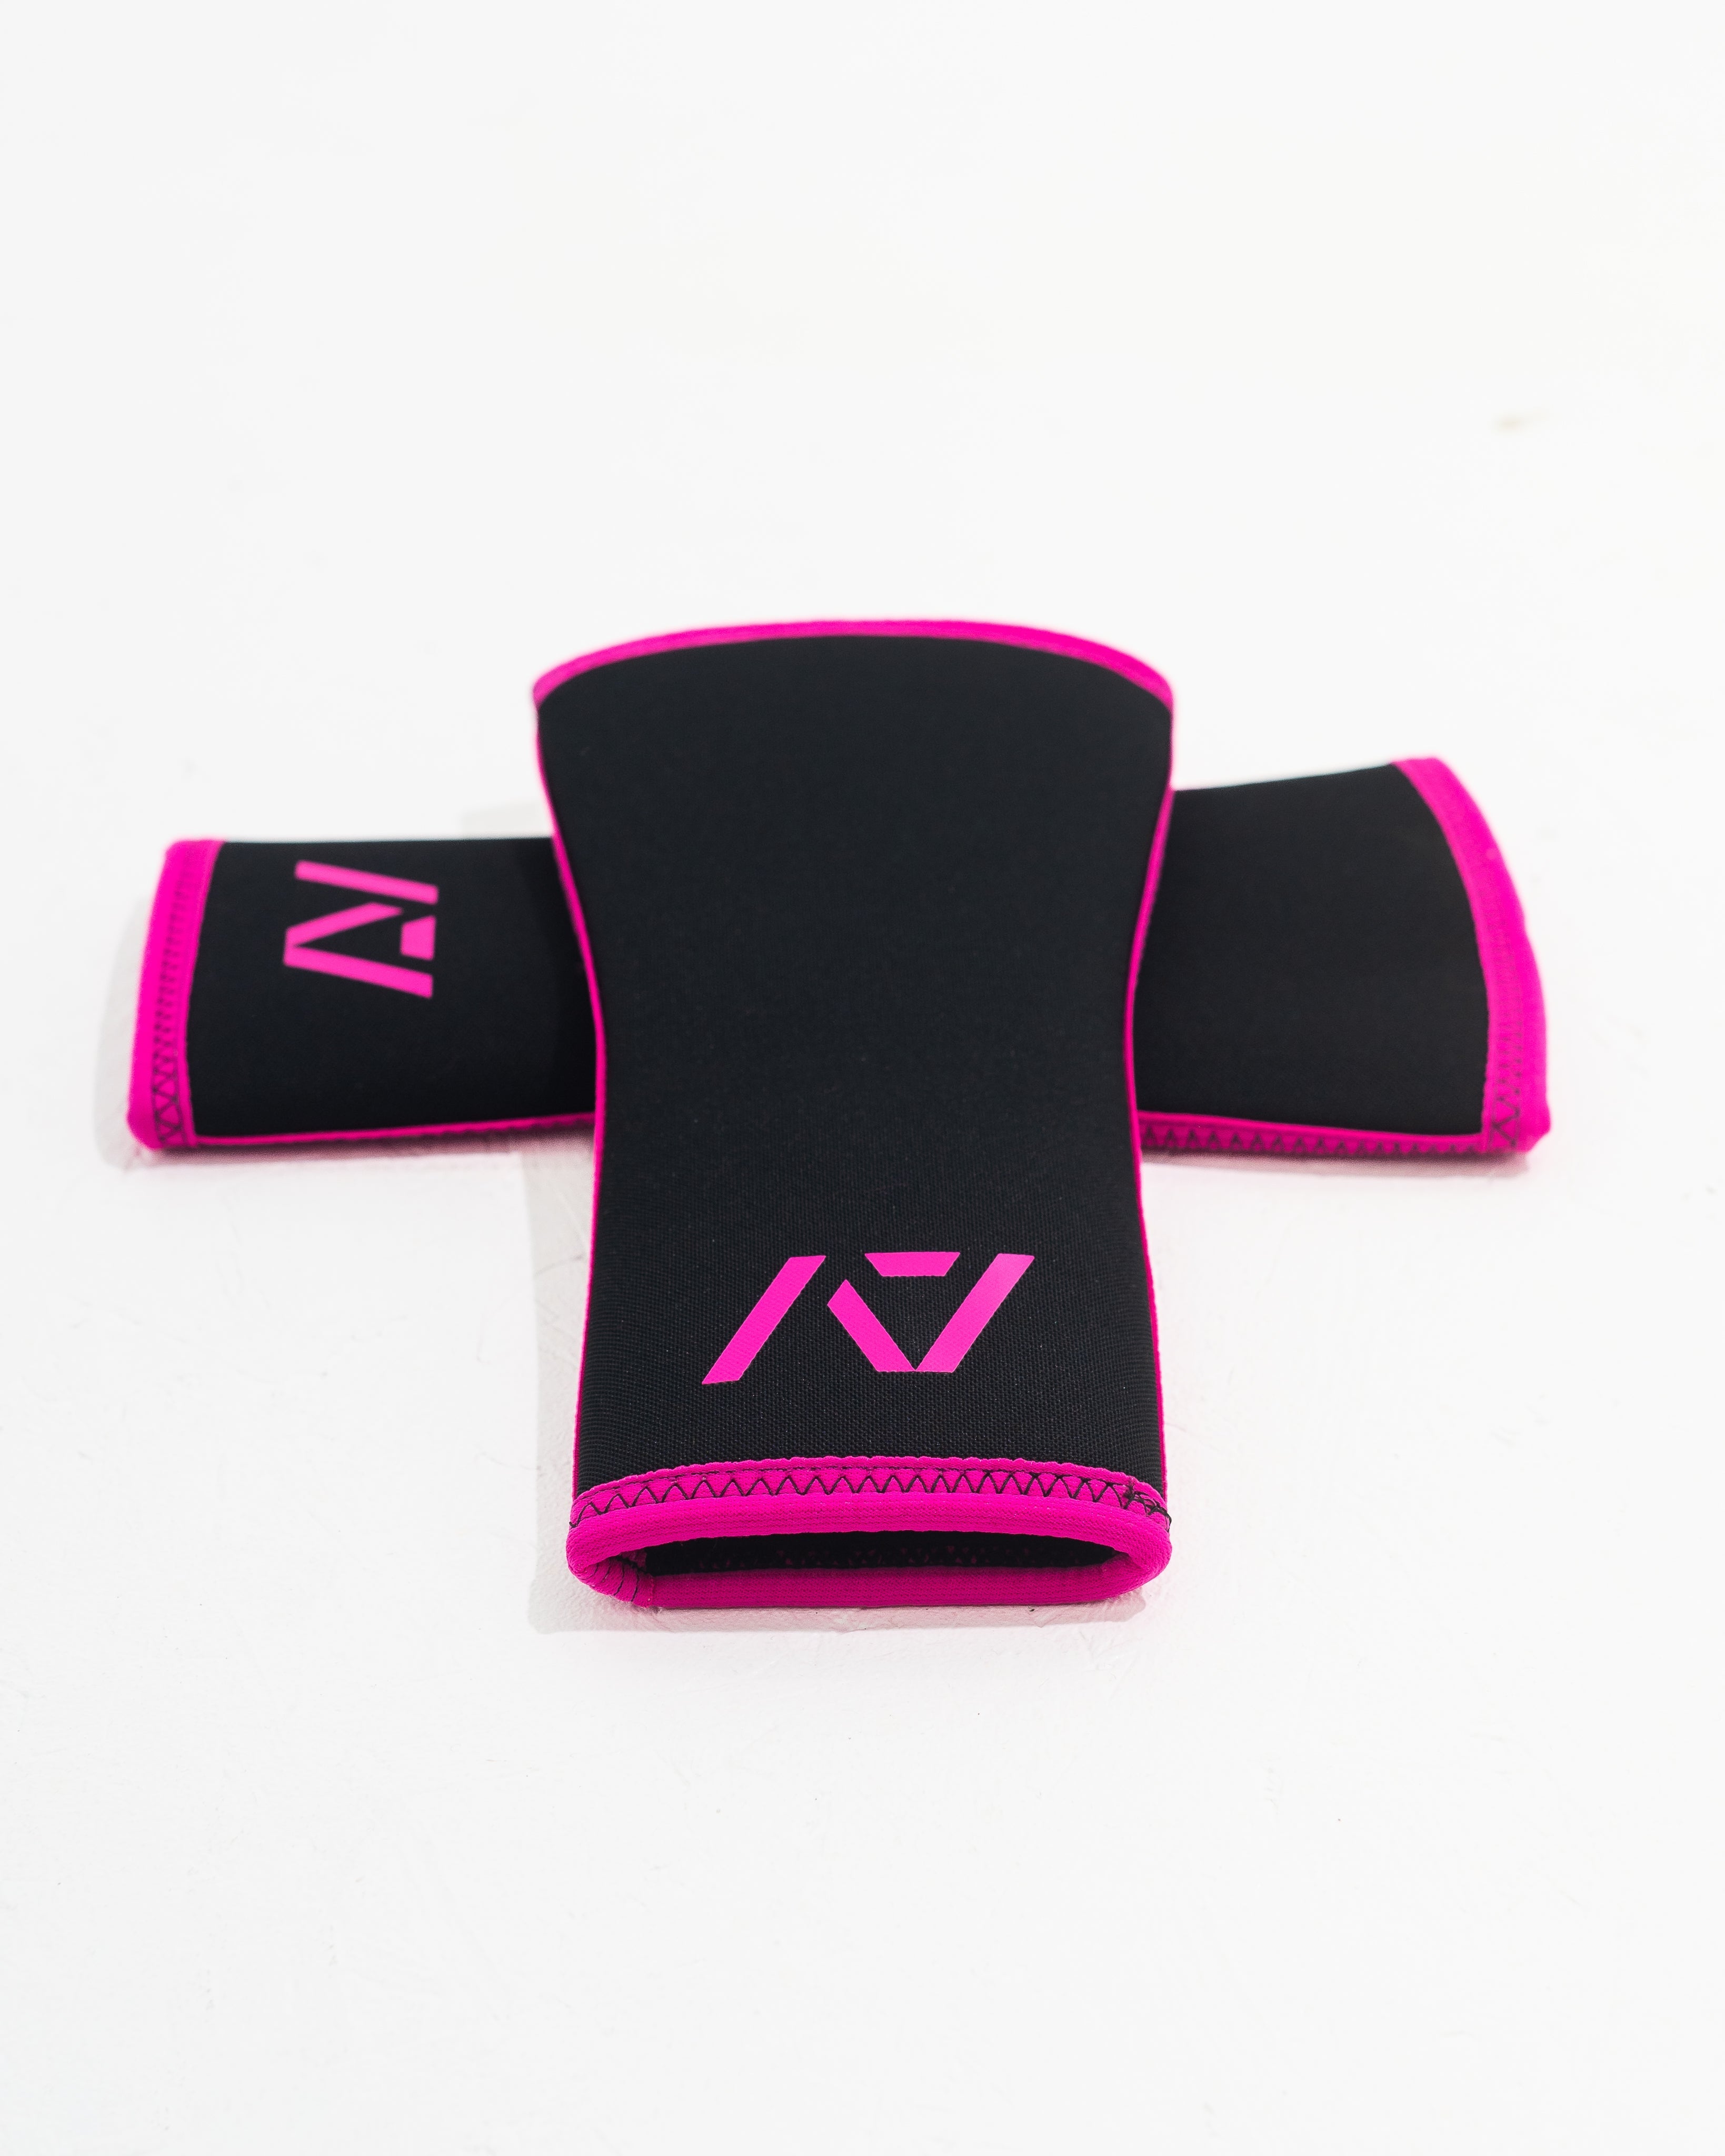 A7 IPF Approved Hourglass Knee Sleeves feature an hourglass-shaped taper fit to provide knee compression while maintaining proper tightness around the calf and quad, offered in three stiffnesses (Flexi, Stiff and Rigor Mortis). The IPF Approved Kit includes Powerlifting Singlet, A7 Meet Shirt, A7 Zebra Wrist Wraps, A7 Deadlift Socks, Hourglass Knee, IPF Approved PAL Lever. Genouillères powerlifting shipping to France, Spain, Ireland, Germany, Italy, Sweden and EU. 